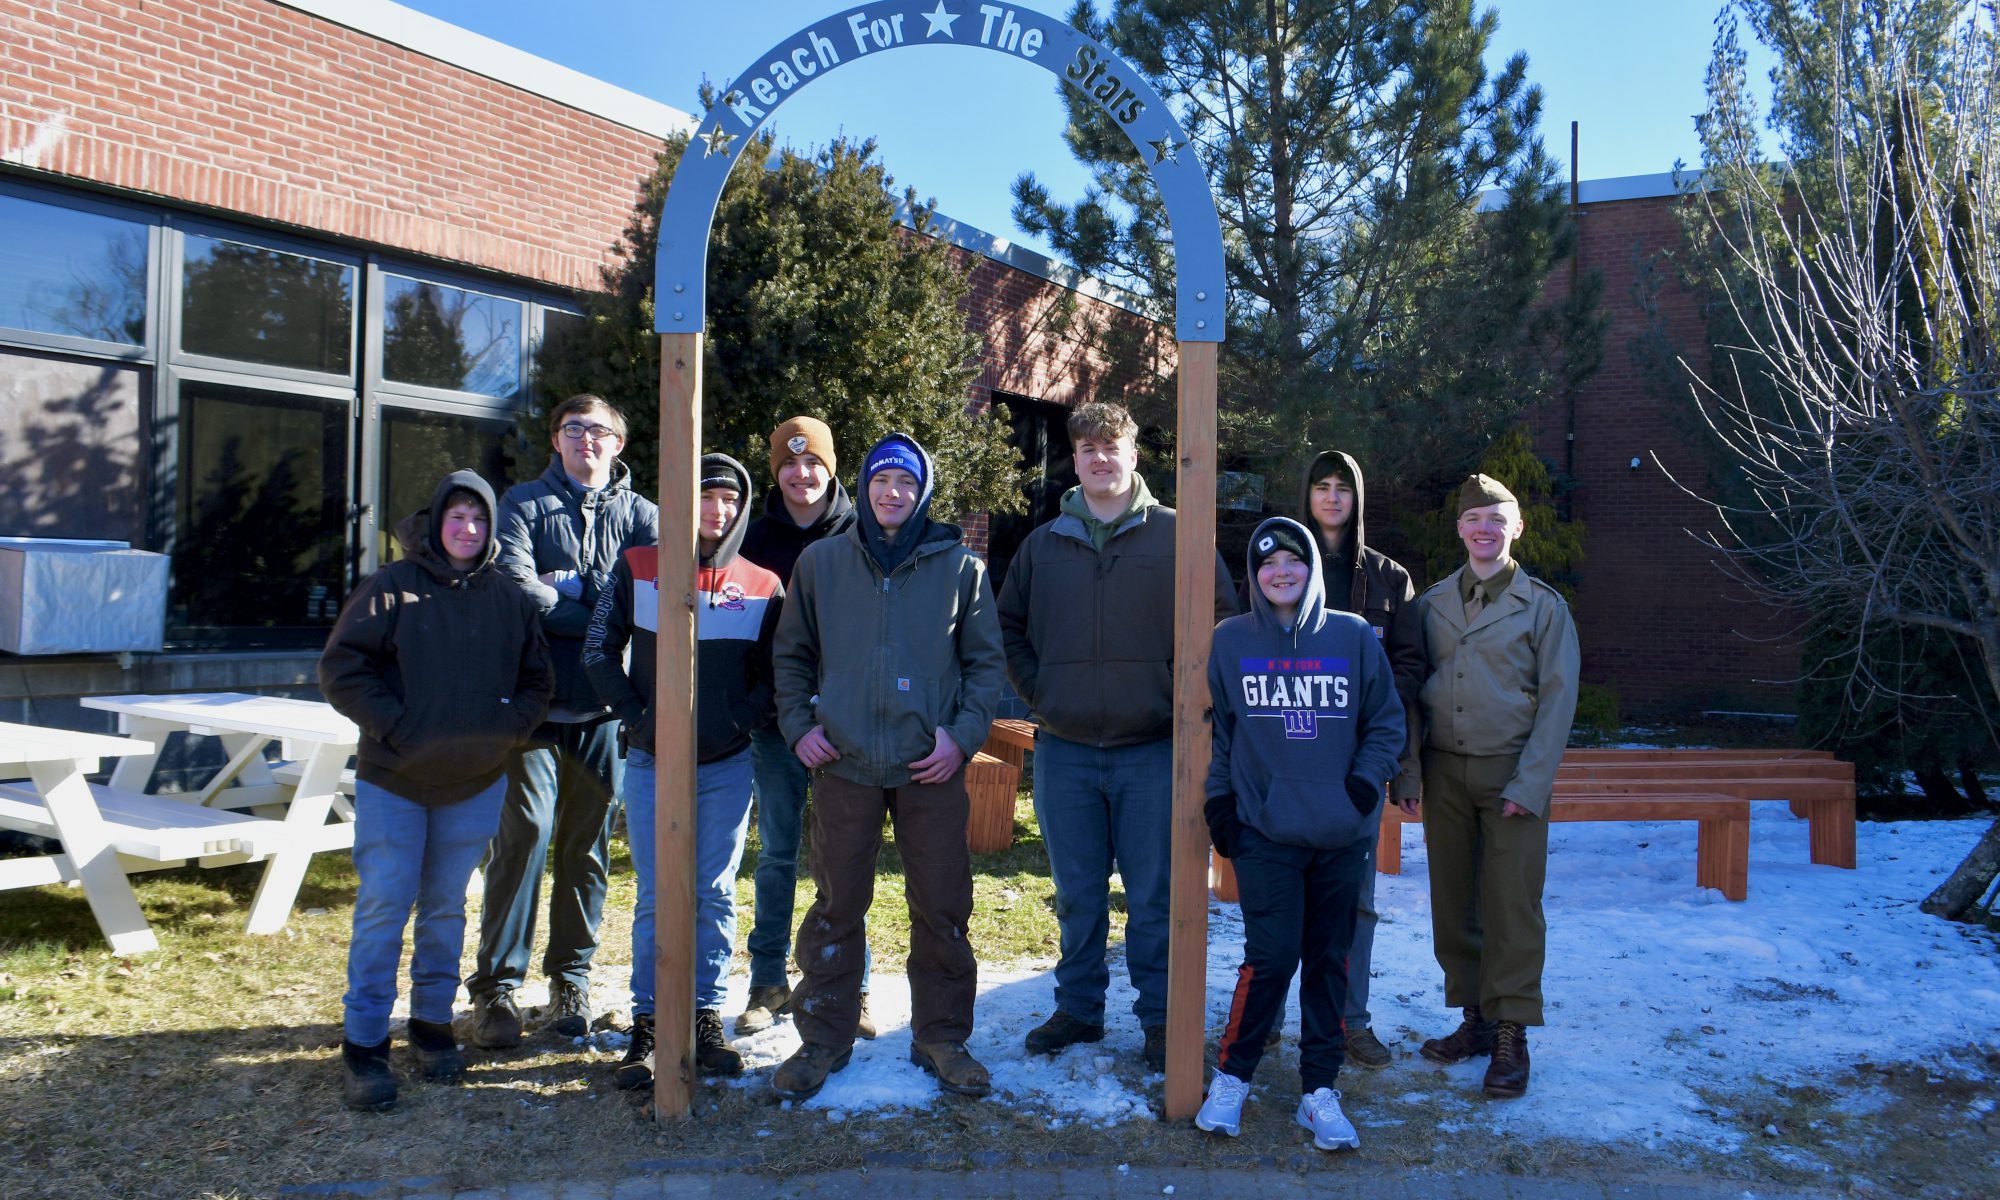 Nine high school students, dressed in winter coats and hats, stand together on a bright winter day. Snow on the ground. They are standing by an arch made of wood and metal they erected. The arch says Reach for the Stars.